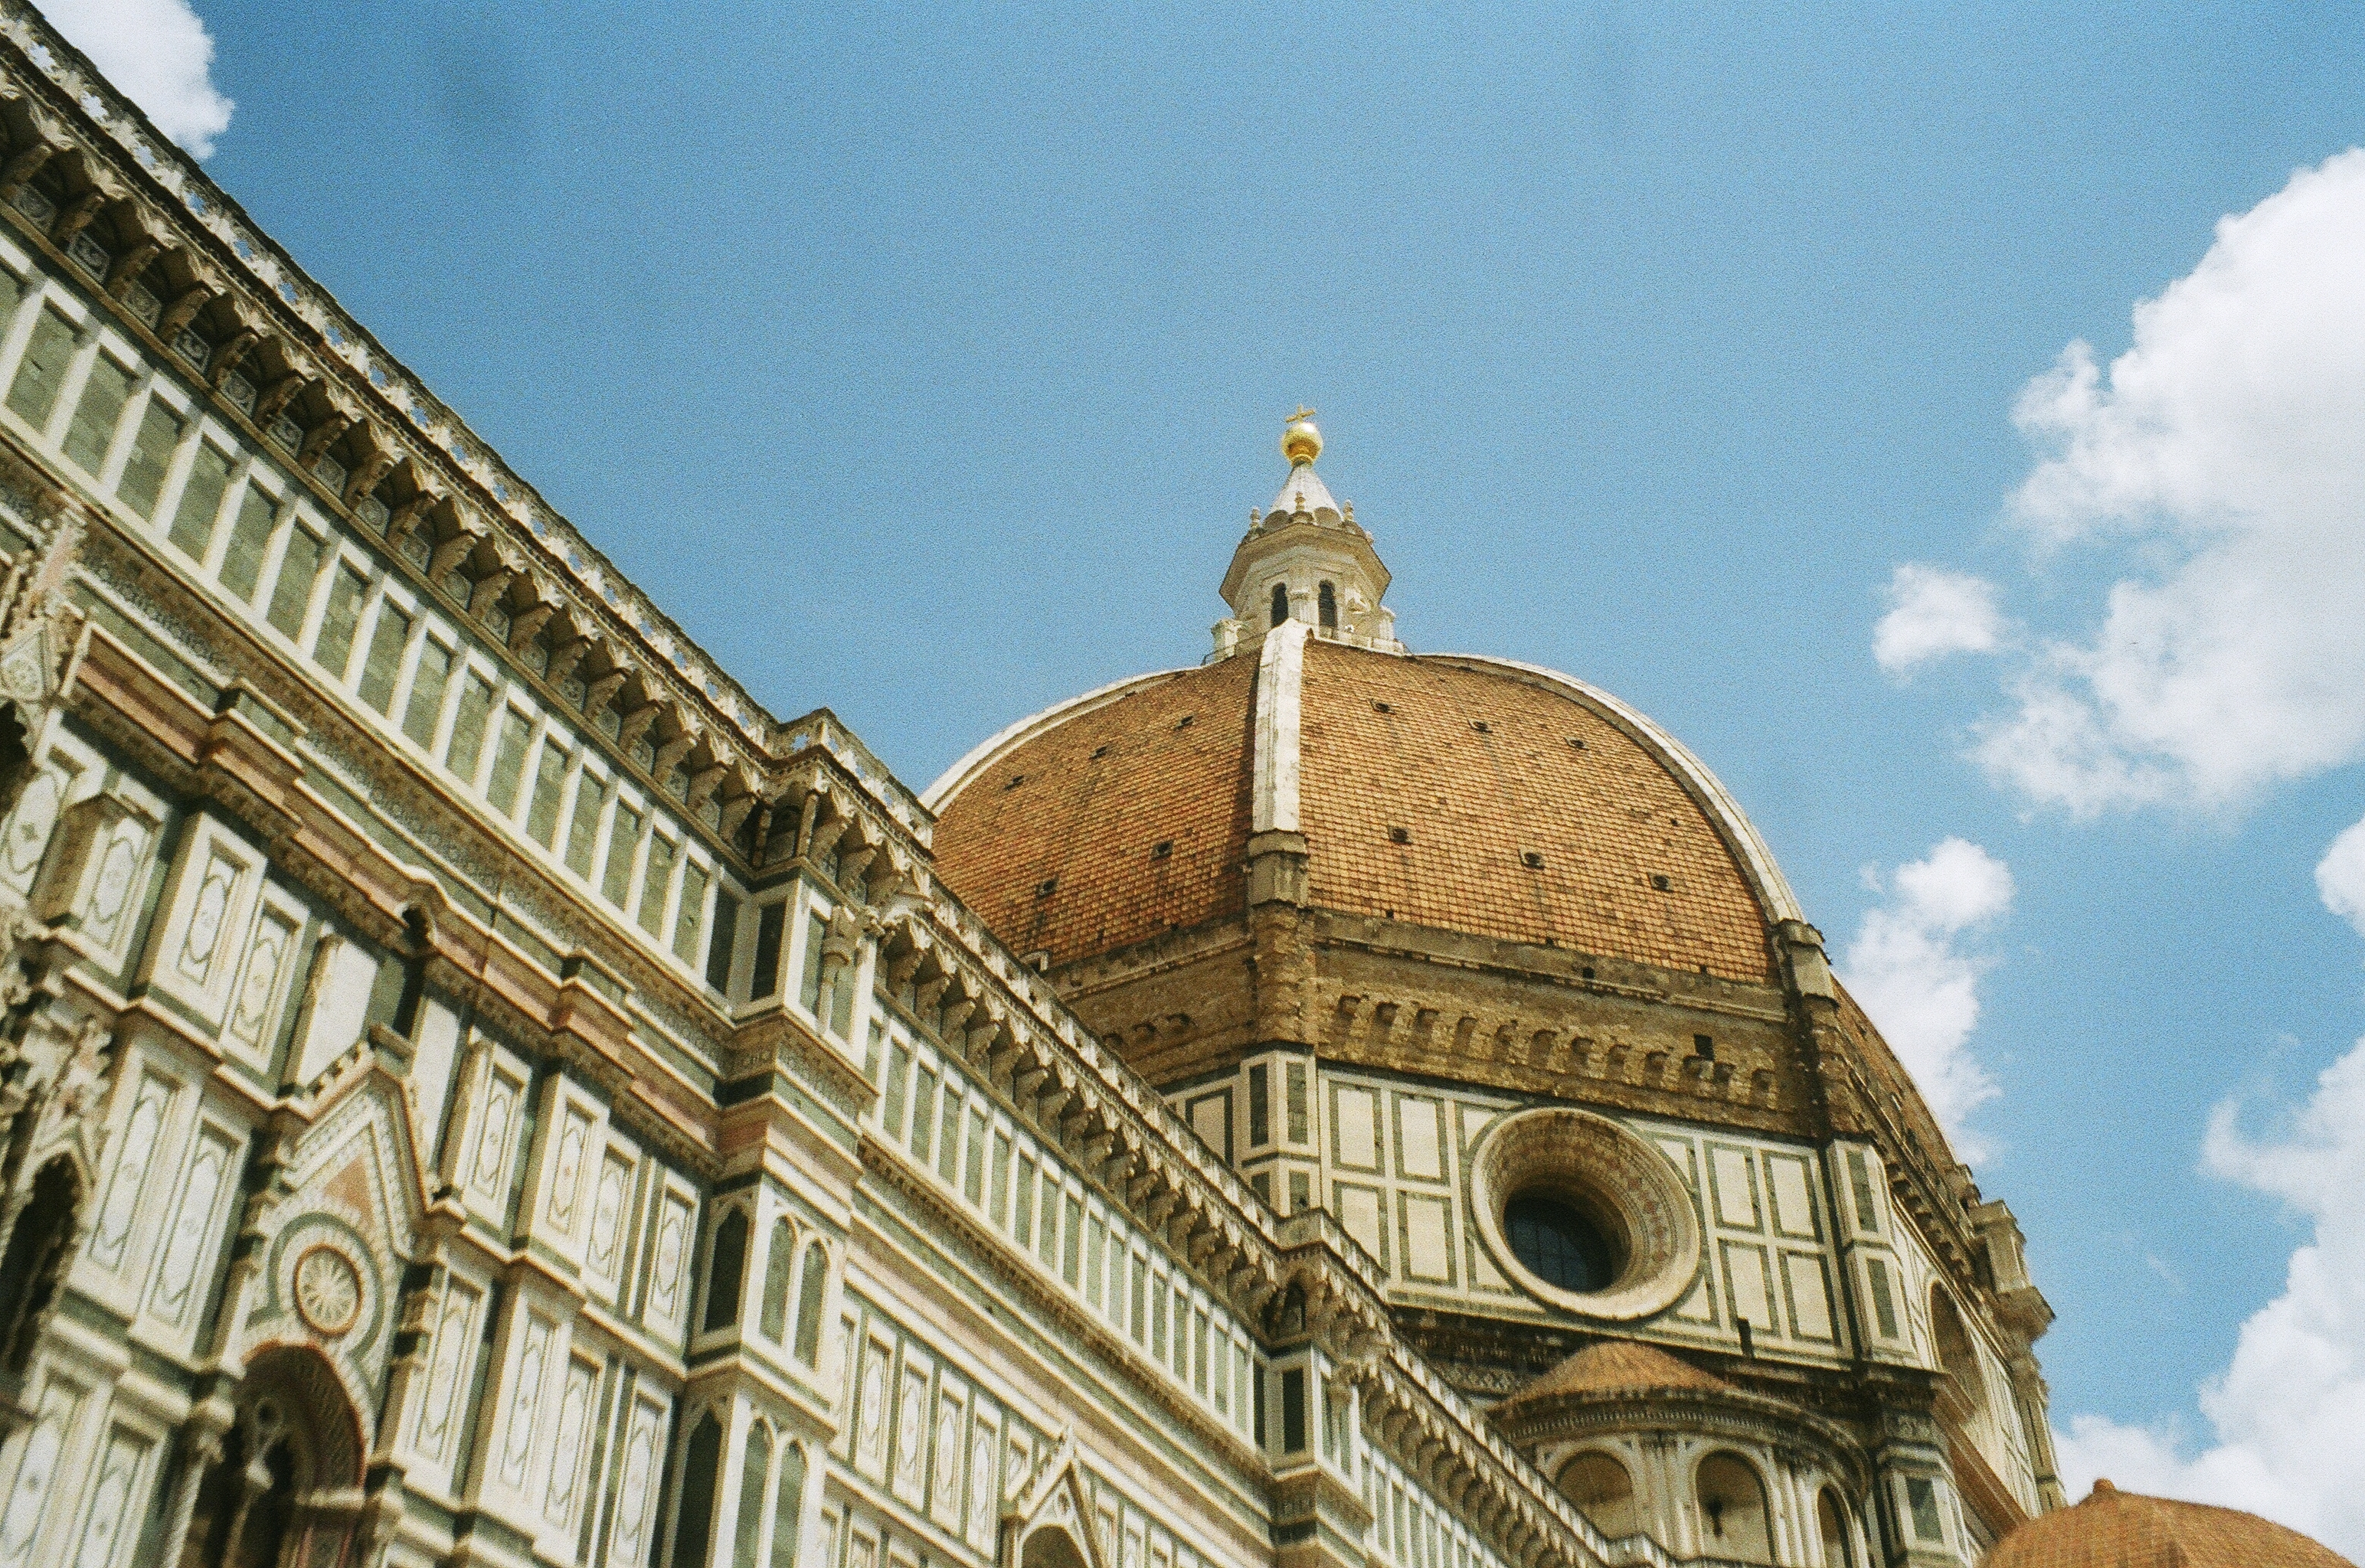 This image depicts a beuatiful angle of the world famous Duomo in Florence Italy. You can see the clay red tiles of the roof of the dome and the beautiful architecture with the stones building up to it.